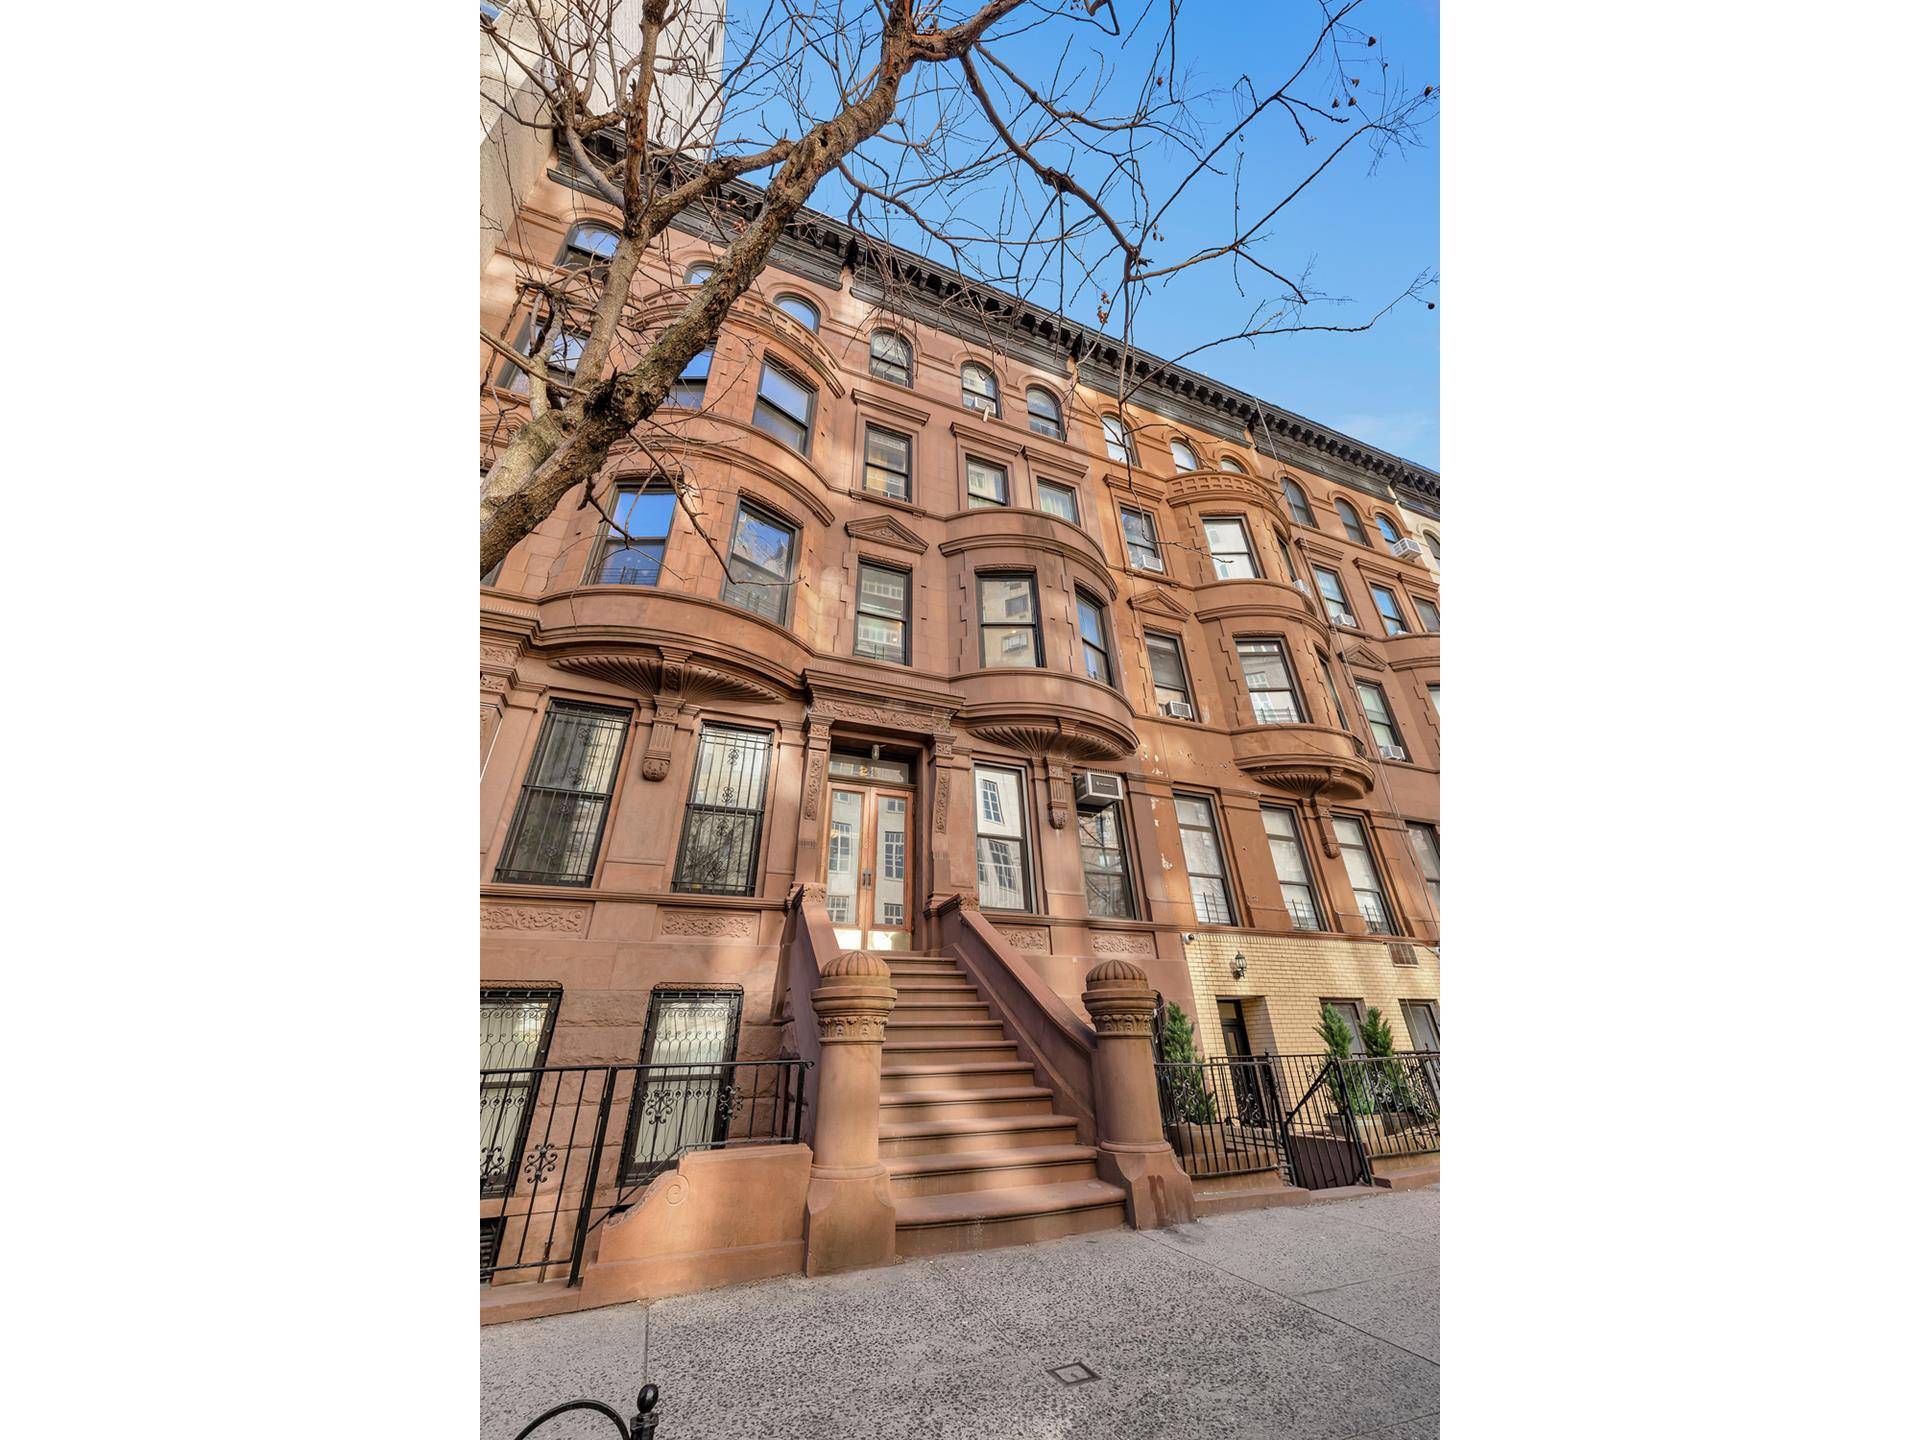 Located at 24 West 96th Street, right next to Central Park, this five story, 20 foot wide brownstone offers a blend of urban convenience, spacious living and additional income.